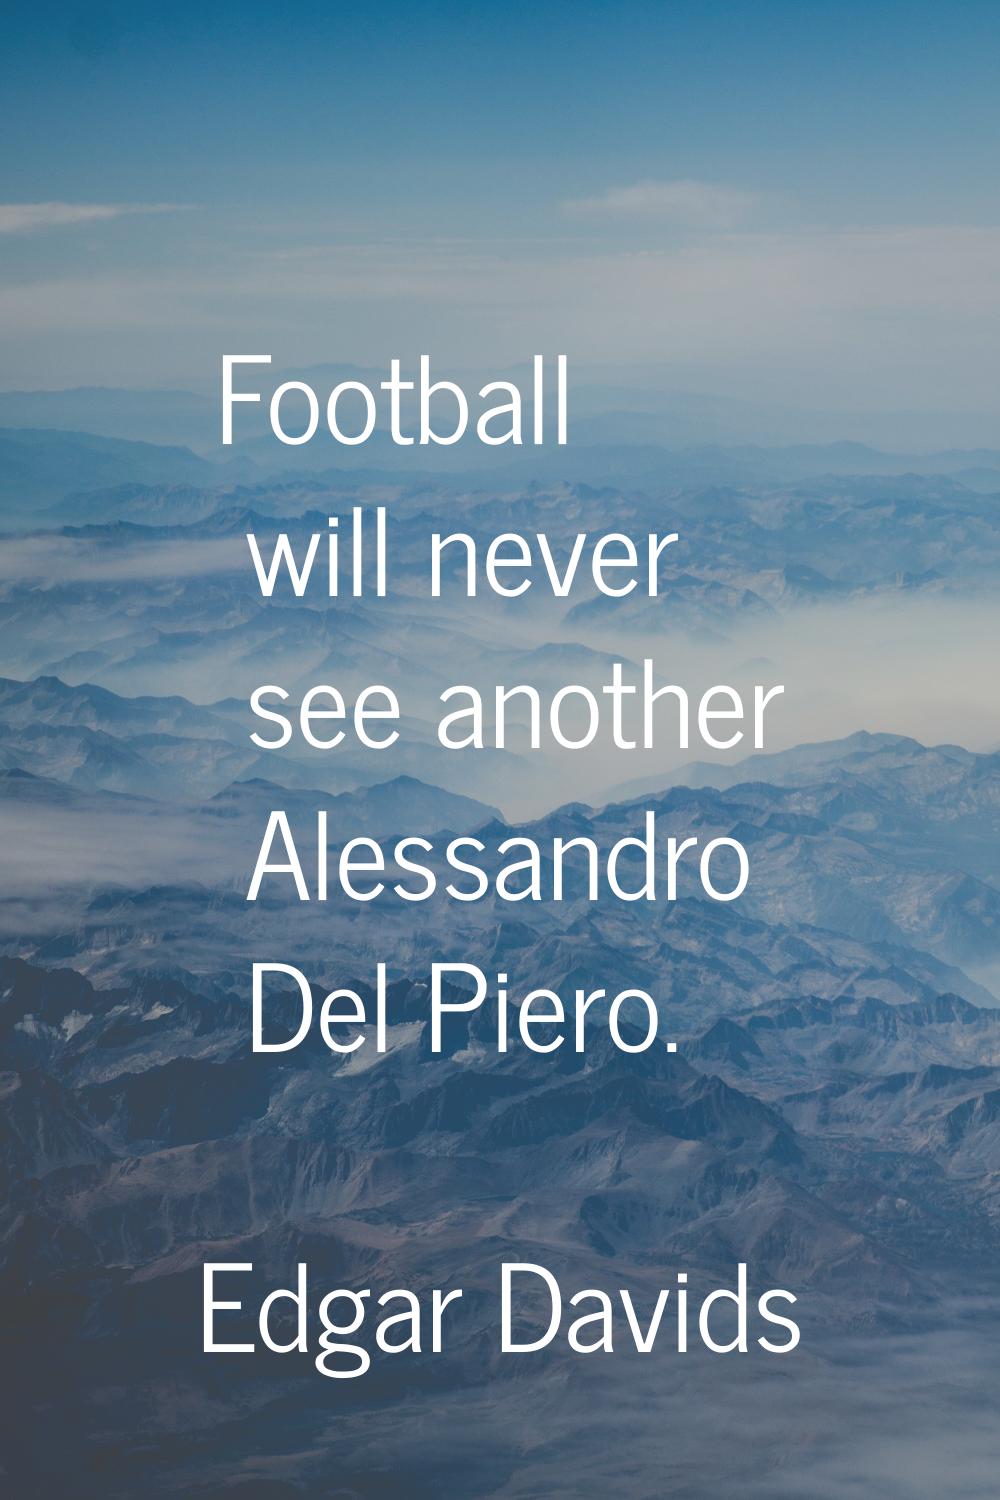 Football will never see another Alessandro Del Piero.